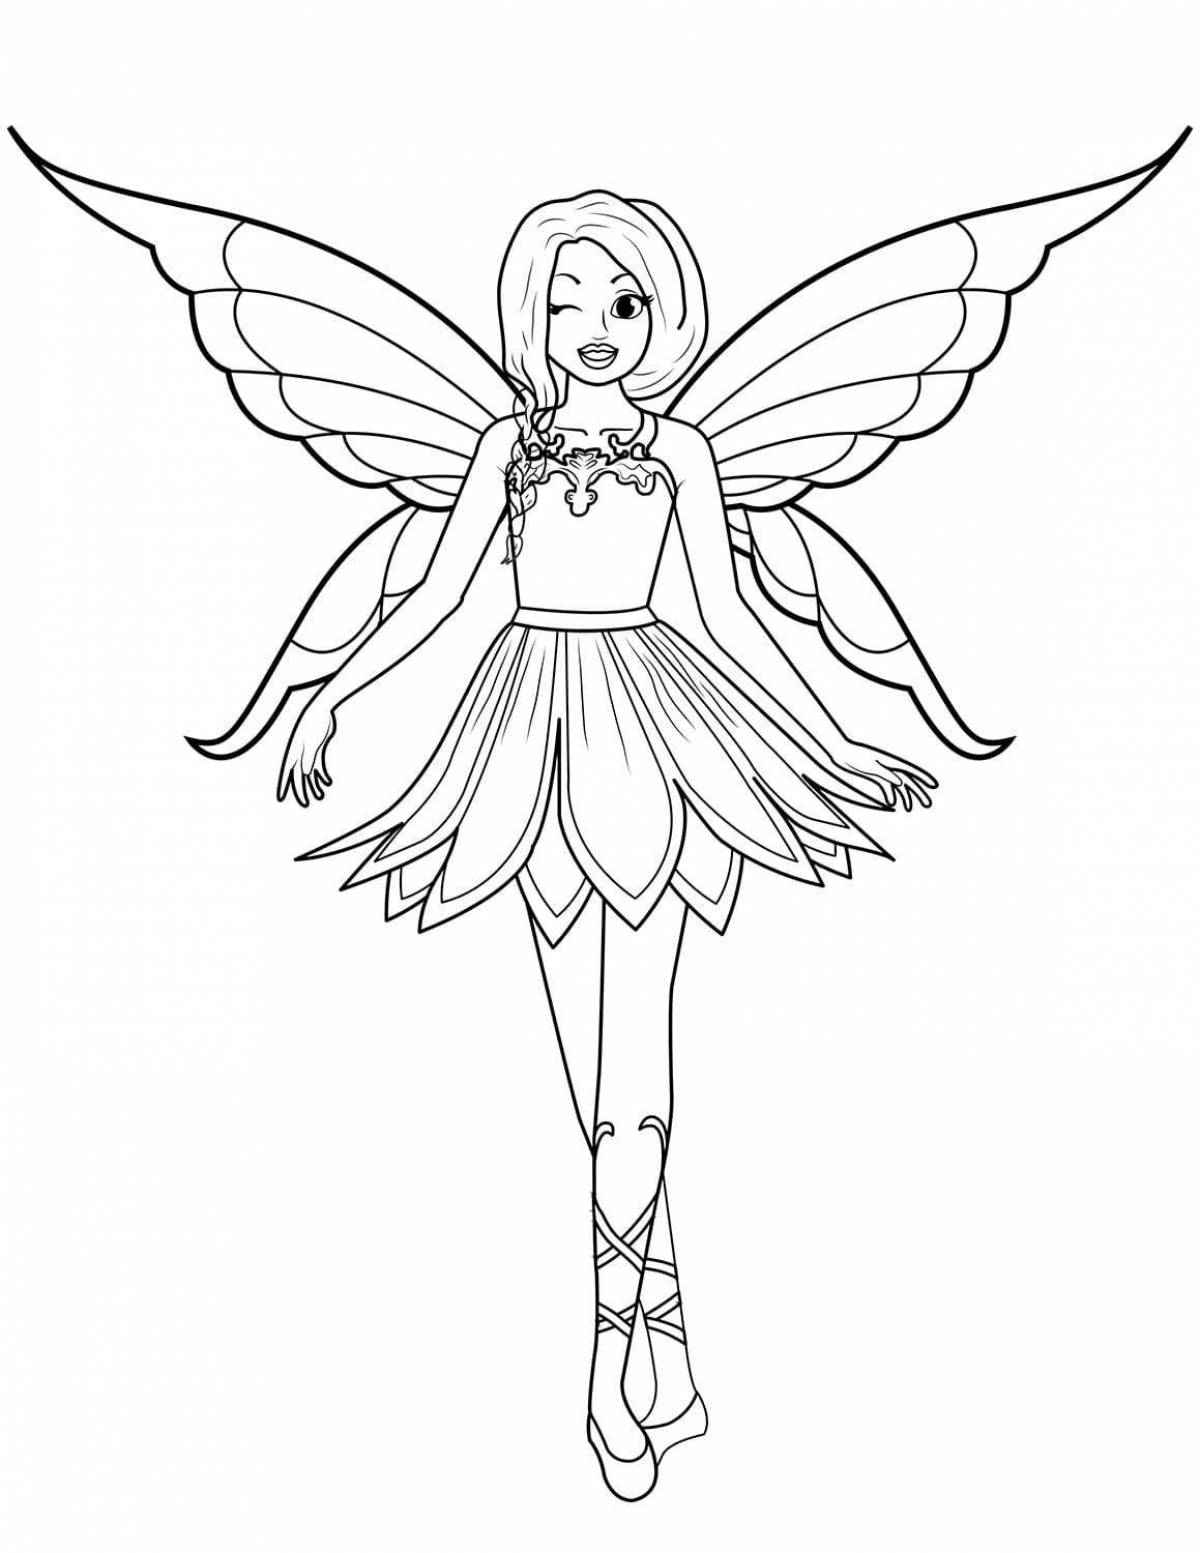 Sparkling fairy coloring pages for girls